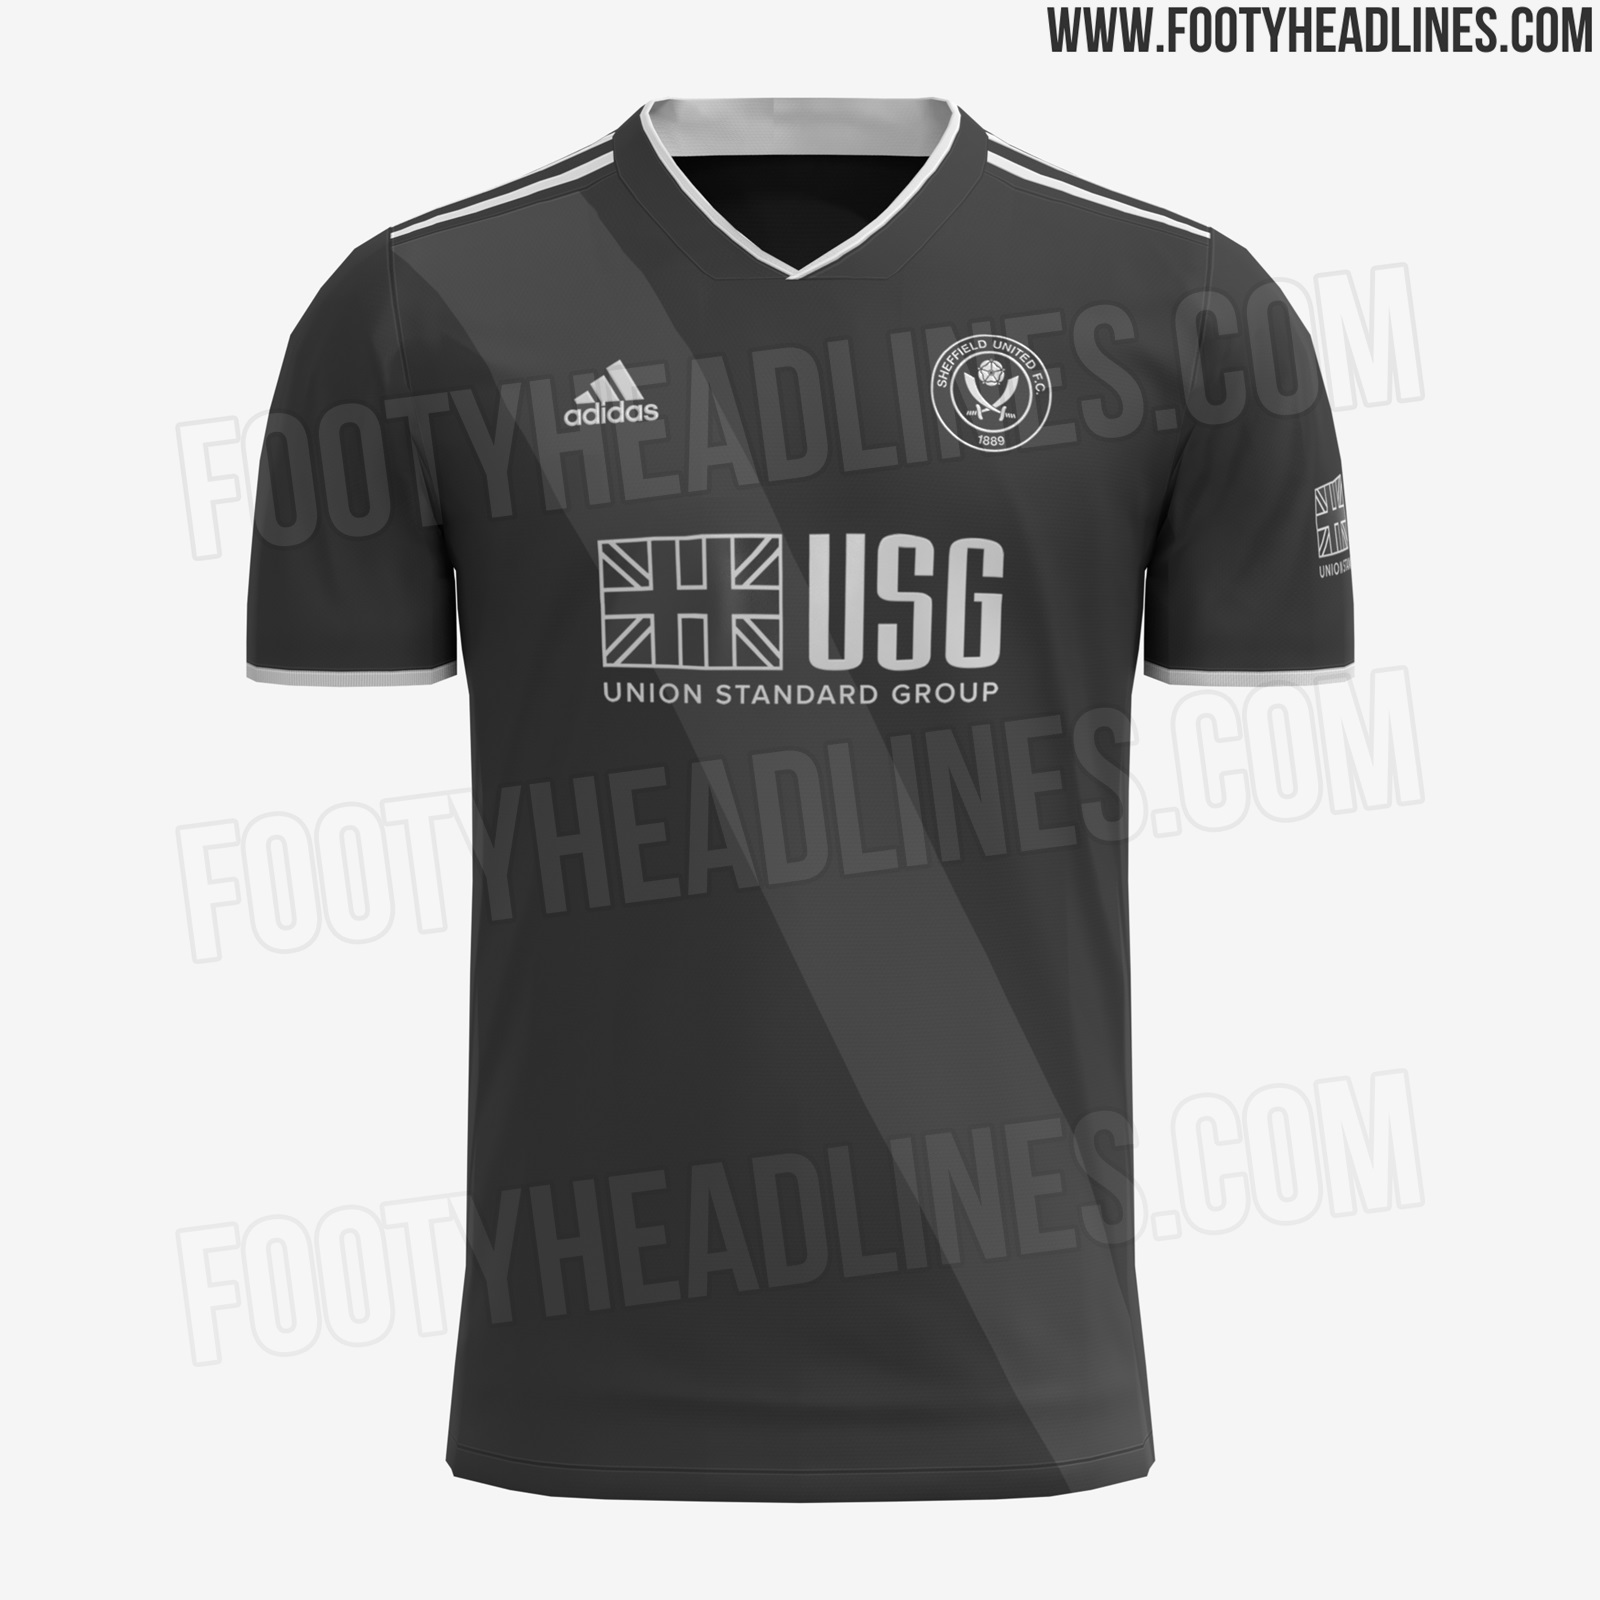 Exclusive: Sheffield United 21-22 Away Kit Leaked